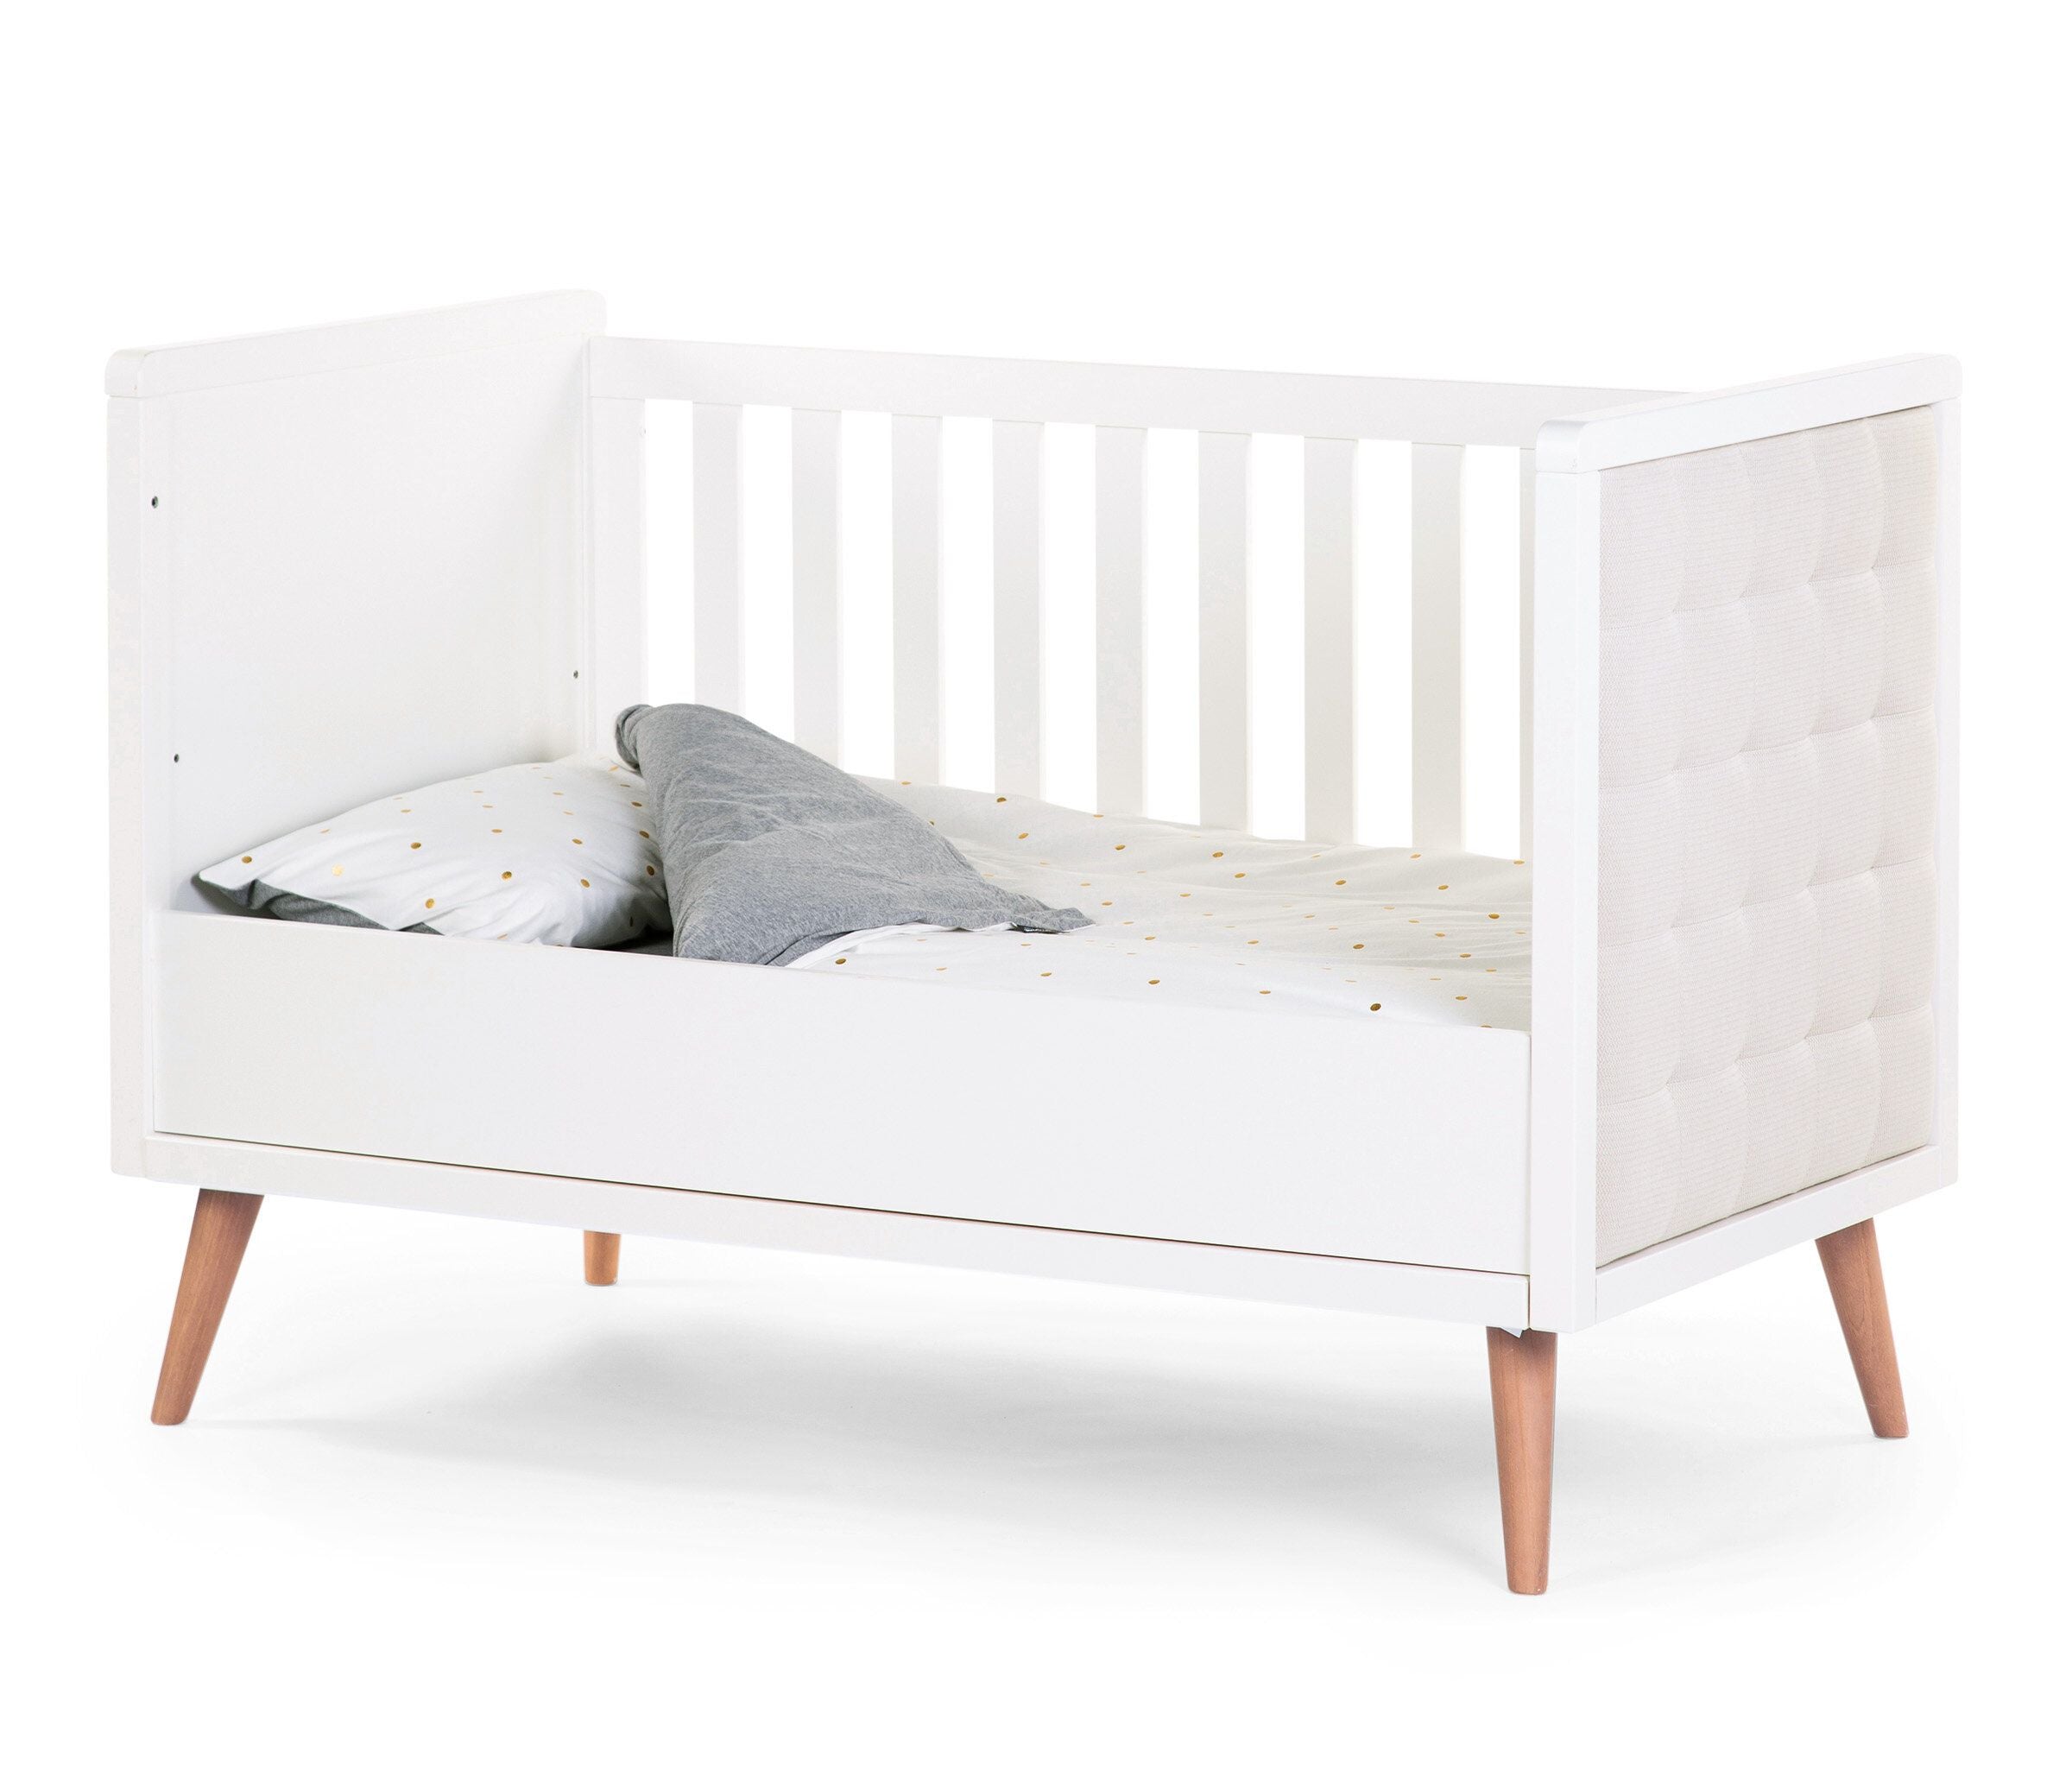 Ombouwbed 70 x 140cm MDF hout Wit - Childhome